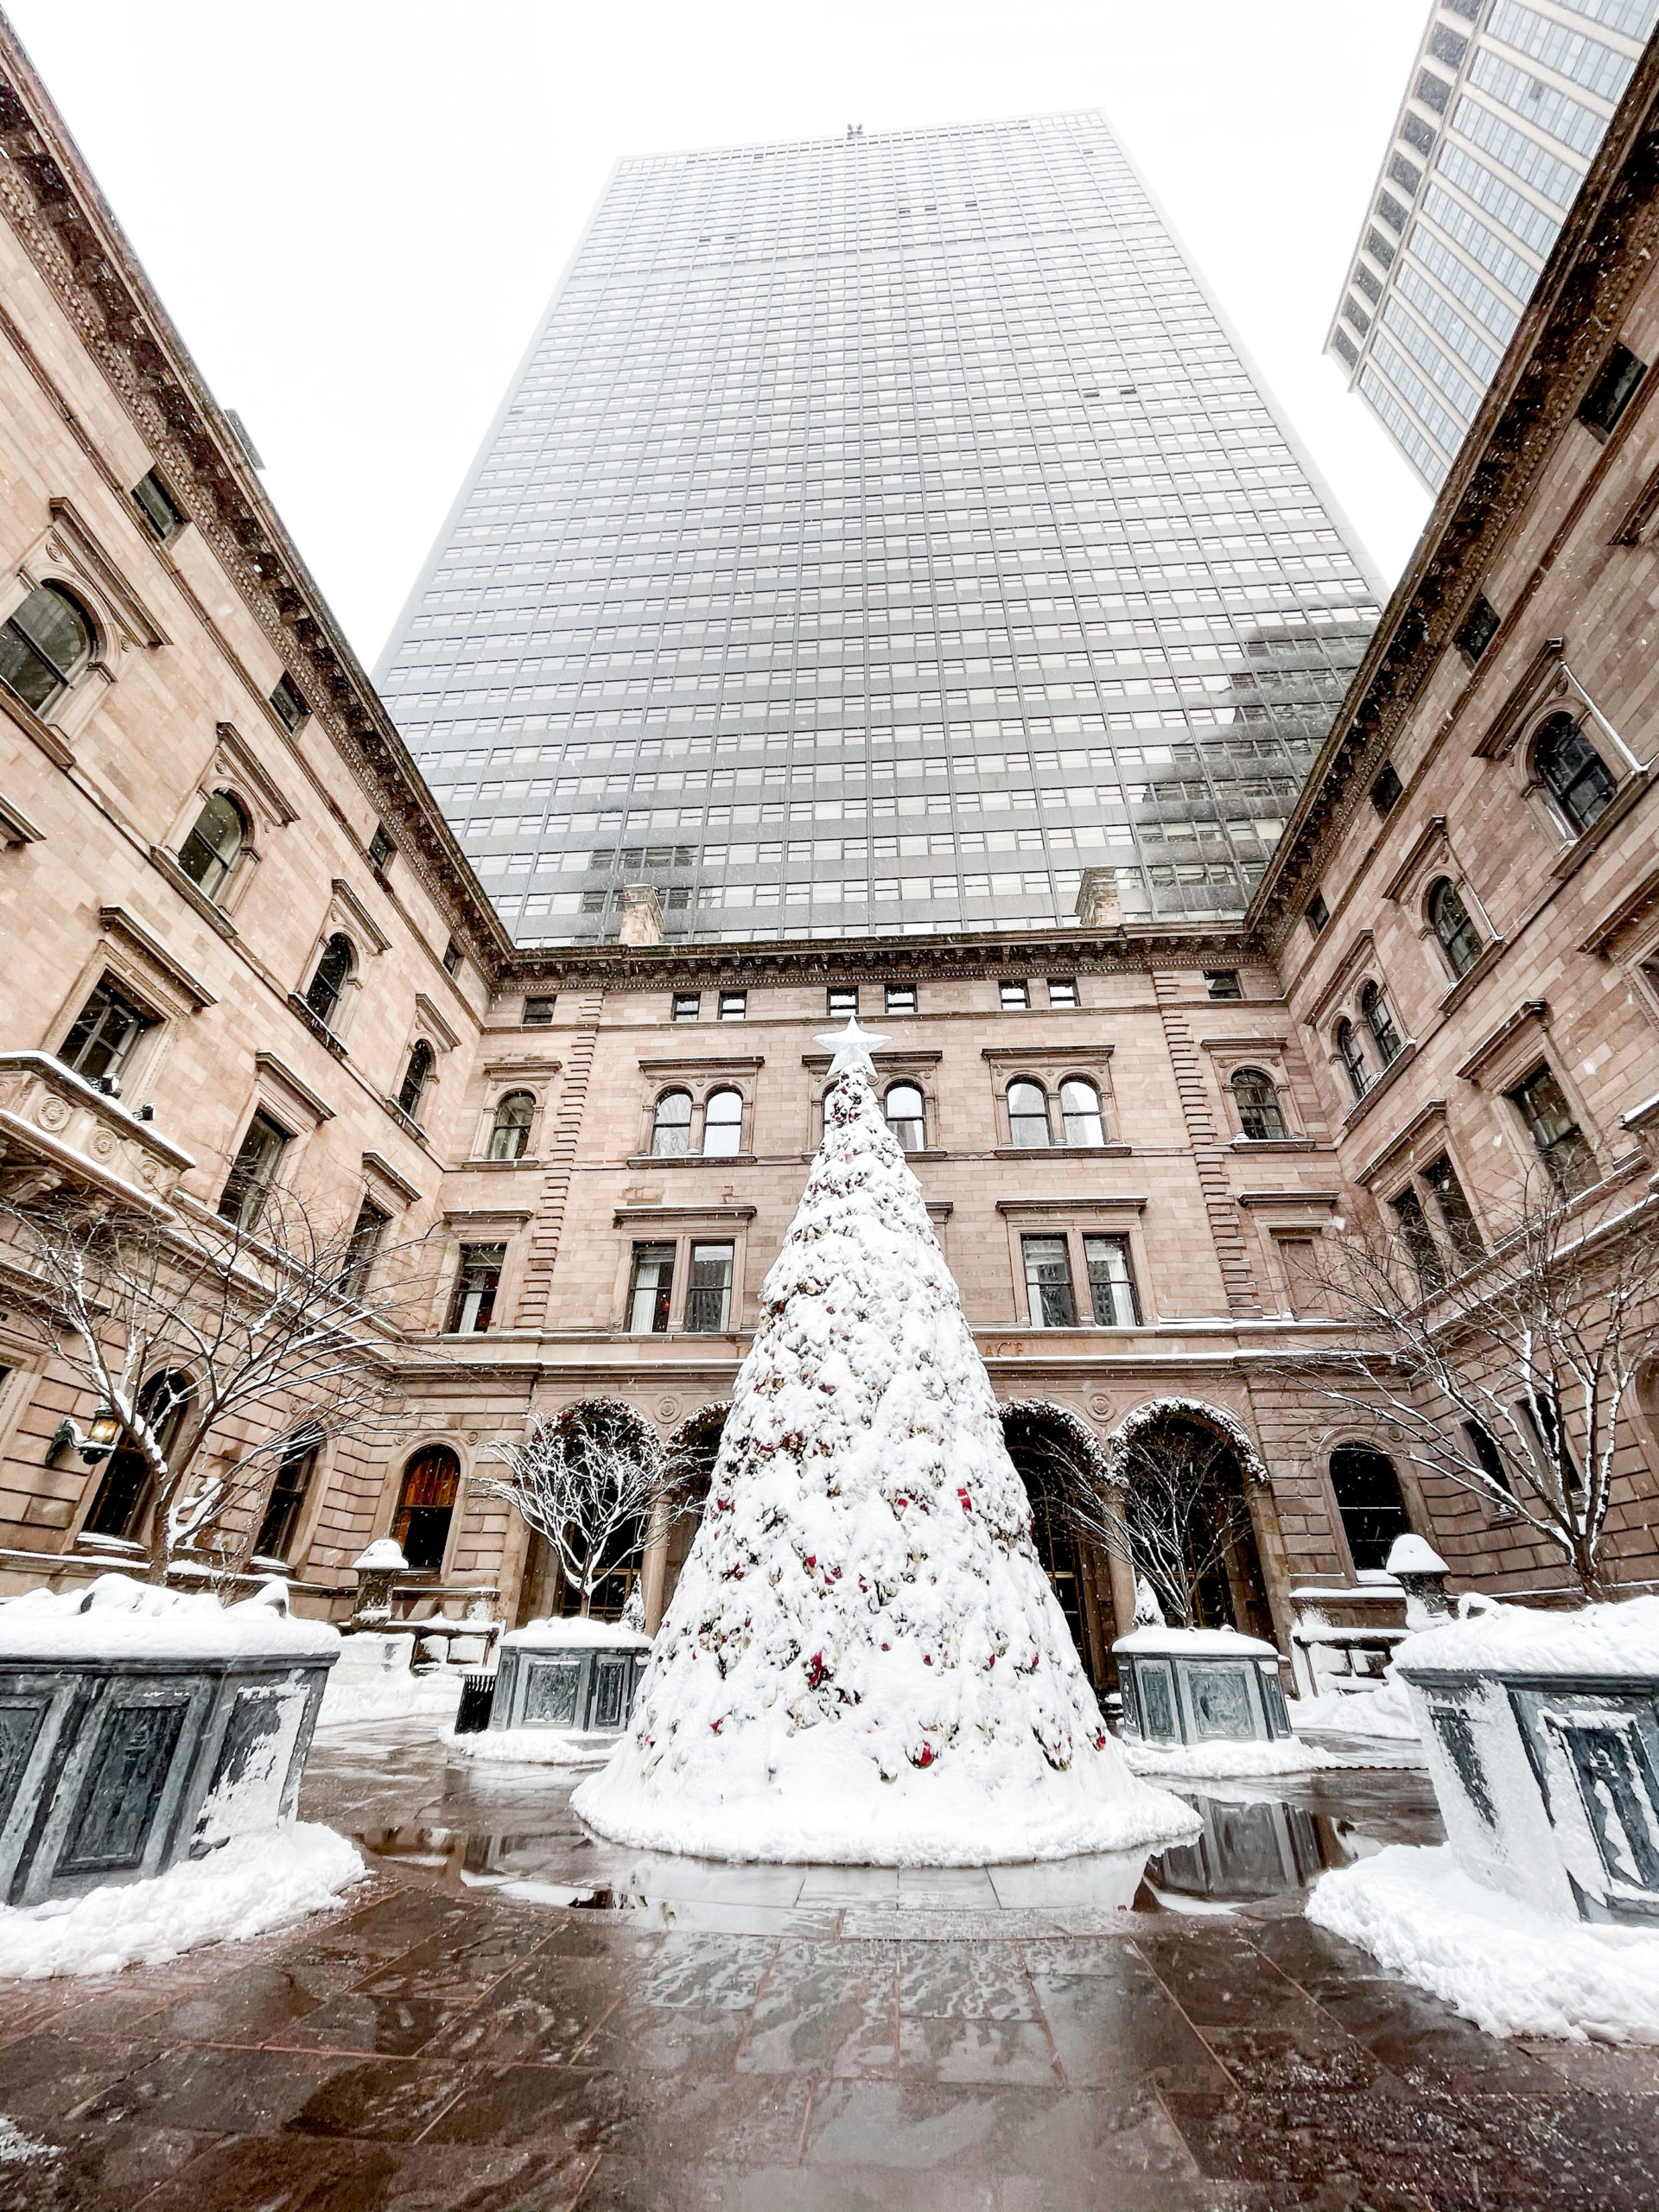 Natale a New York, Lotte Hotel neve